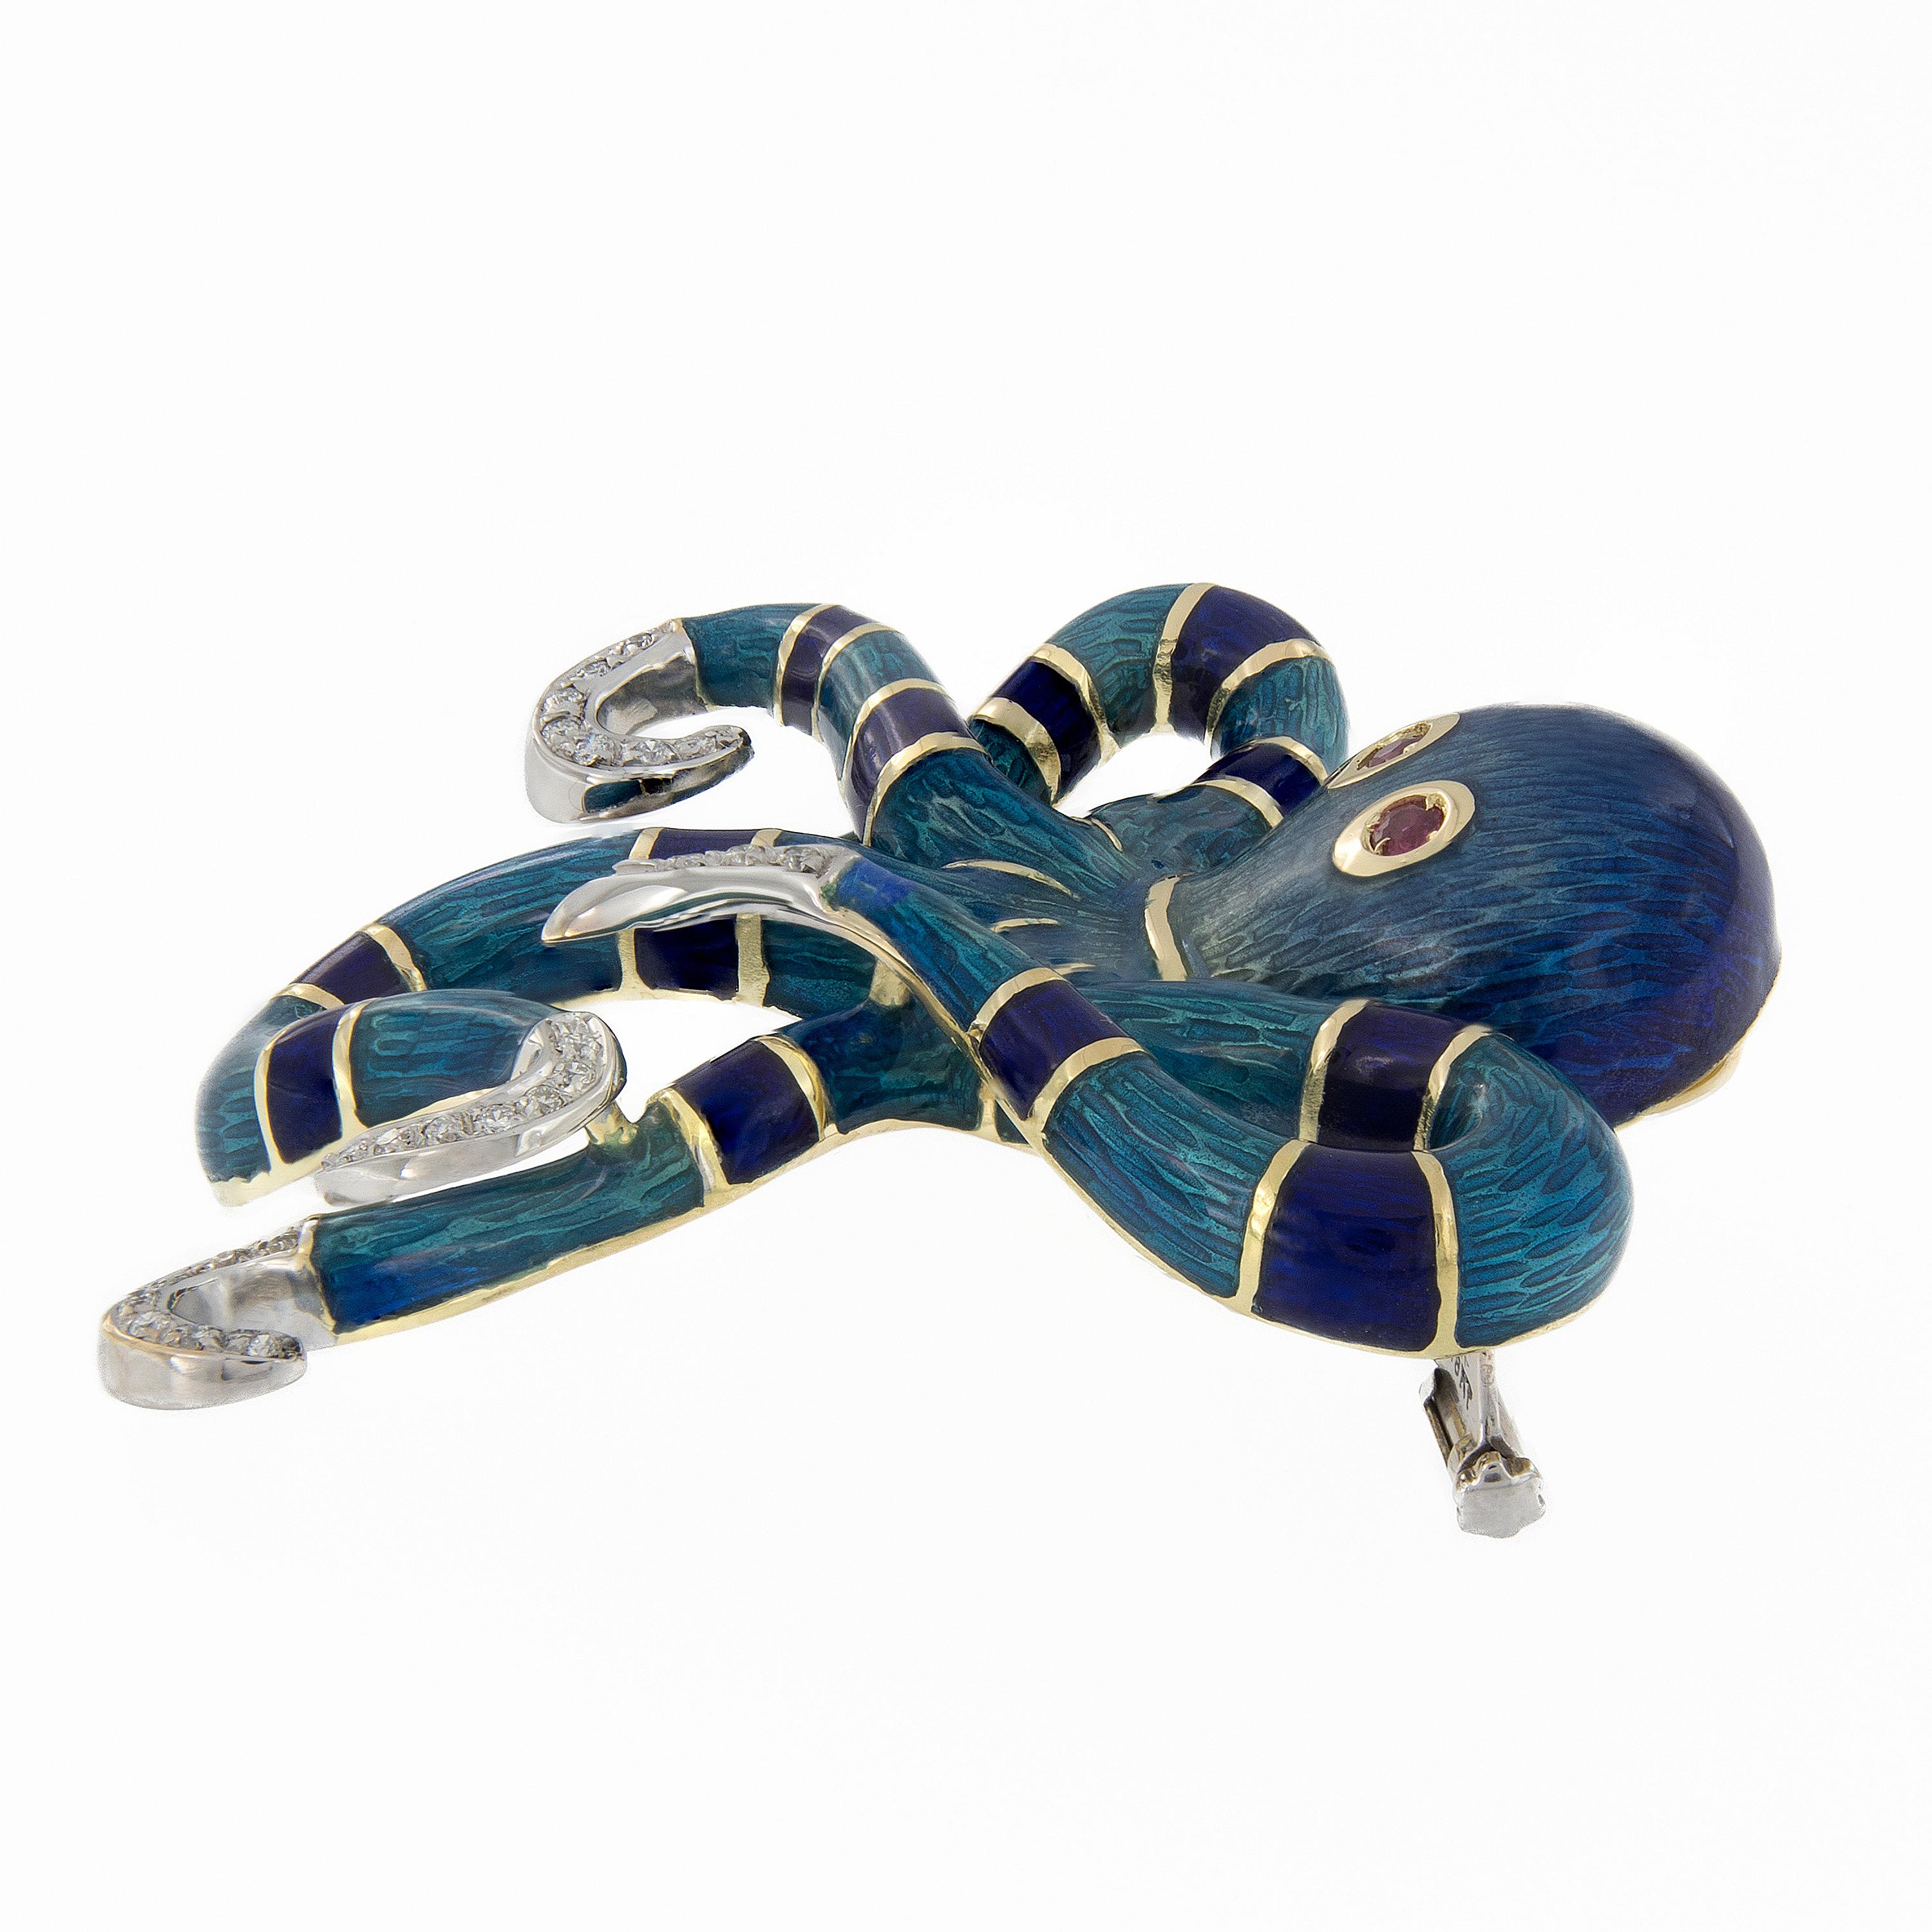 Cute, quirky and beautifully crafted in 18K yellow and white gold. The octopus brooche features royal blue and teal guilloche enamel, diamond accents and ruby eyes. Octopus measures 1.77 x 2.25 inches. Weighs 29.3 grams.

Diamonds 0.18 cttw
Rubies